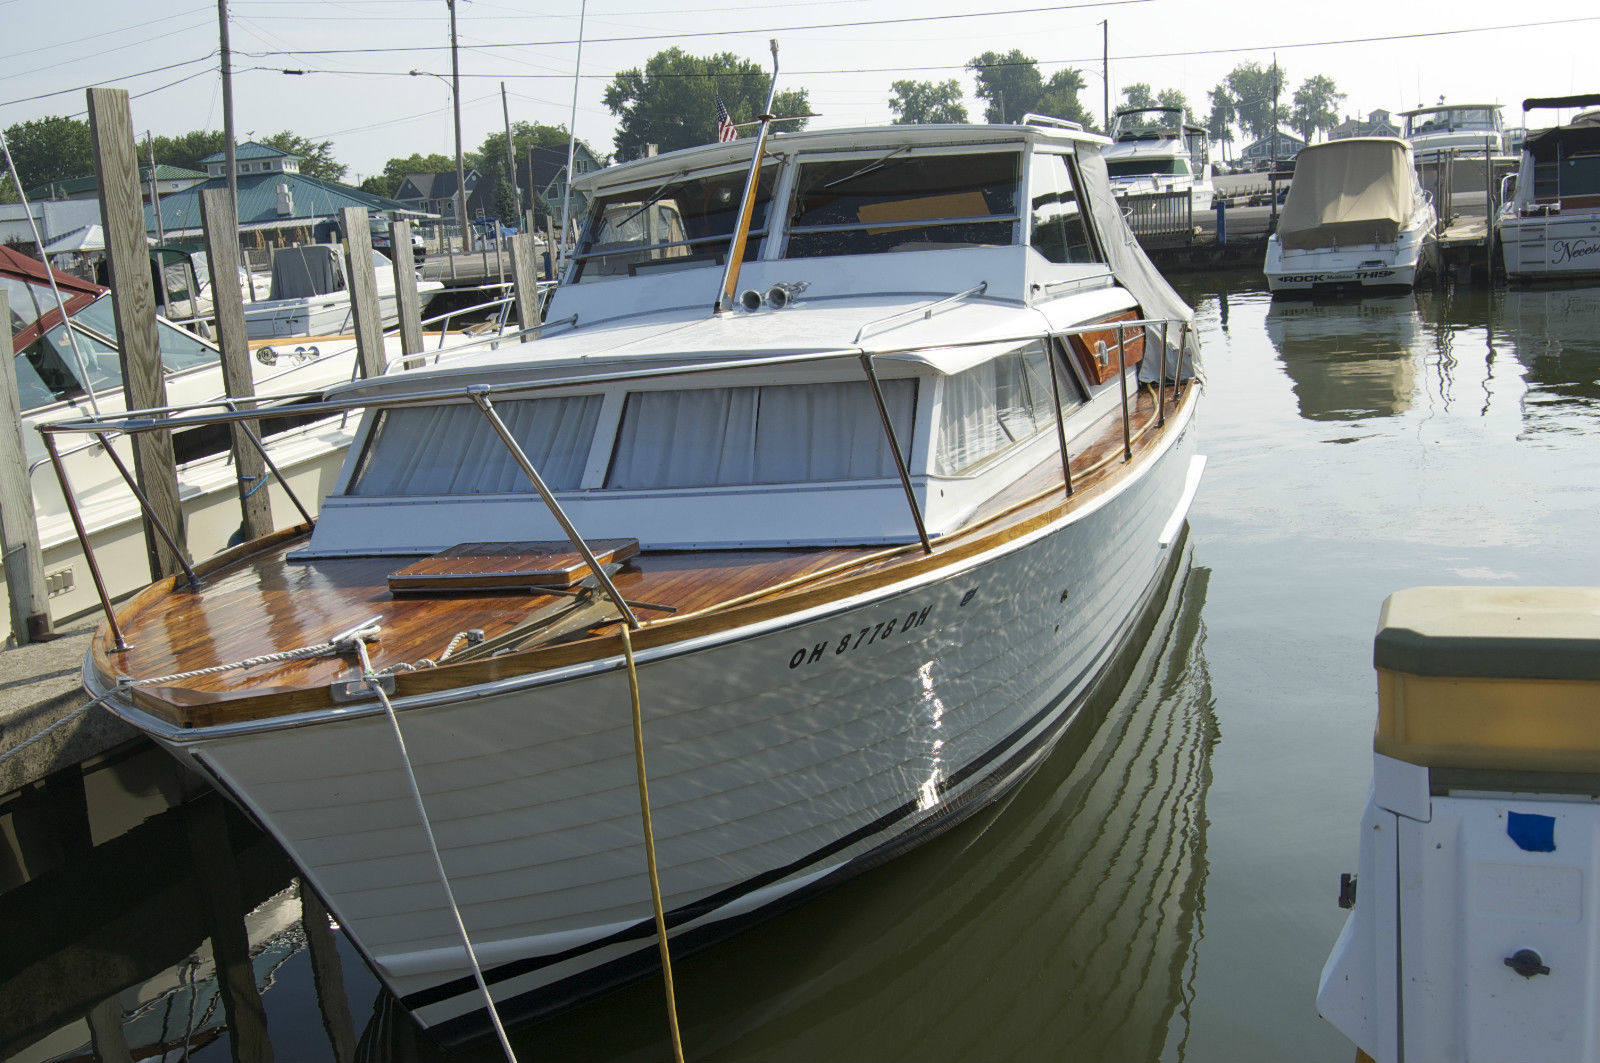 Trojan Express Cruiser 1968 for sale for $12,500 - Boats ...